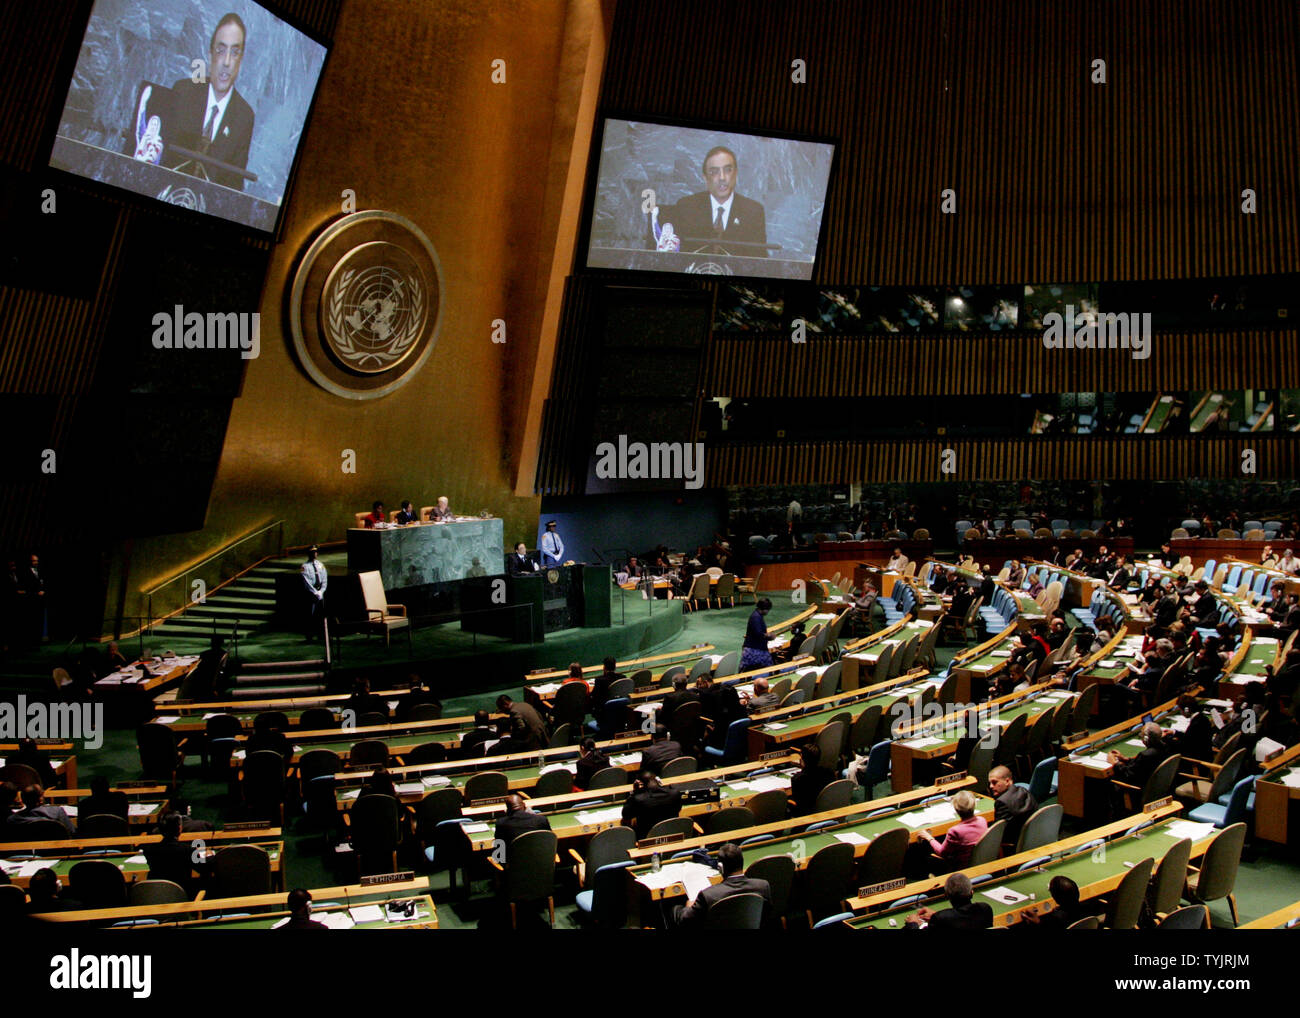 Asif Ali Zardari, President of Pakistan and husband of Benazir Bhutto, addresses the 63rd session of the General Assembly at the UN on September 25, 2008 in New York City. (UPI Photo/Monika Graff) Stock Photo